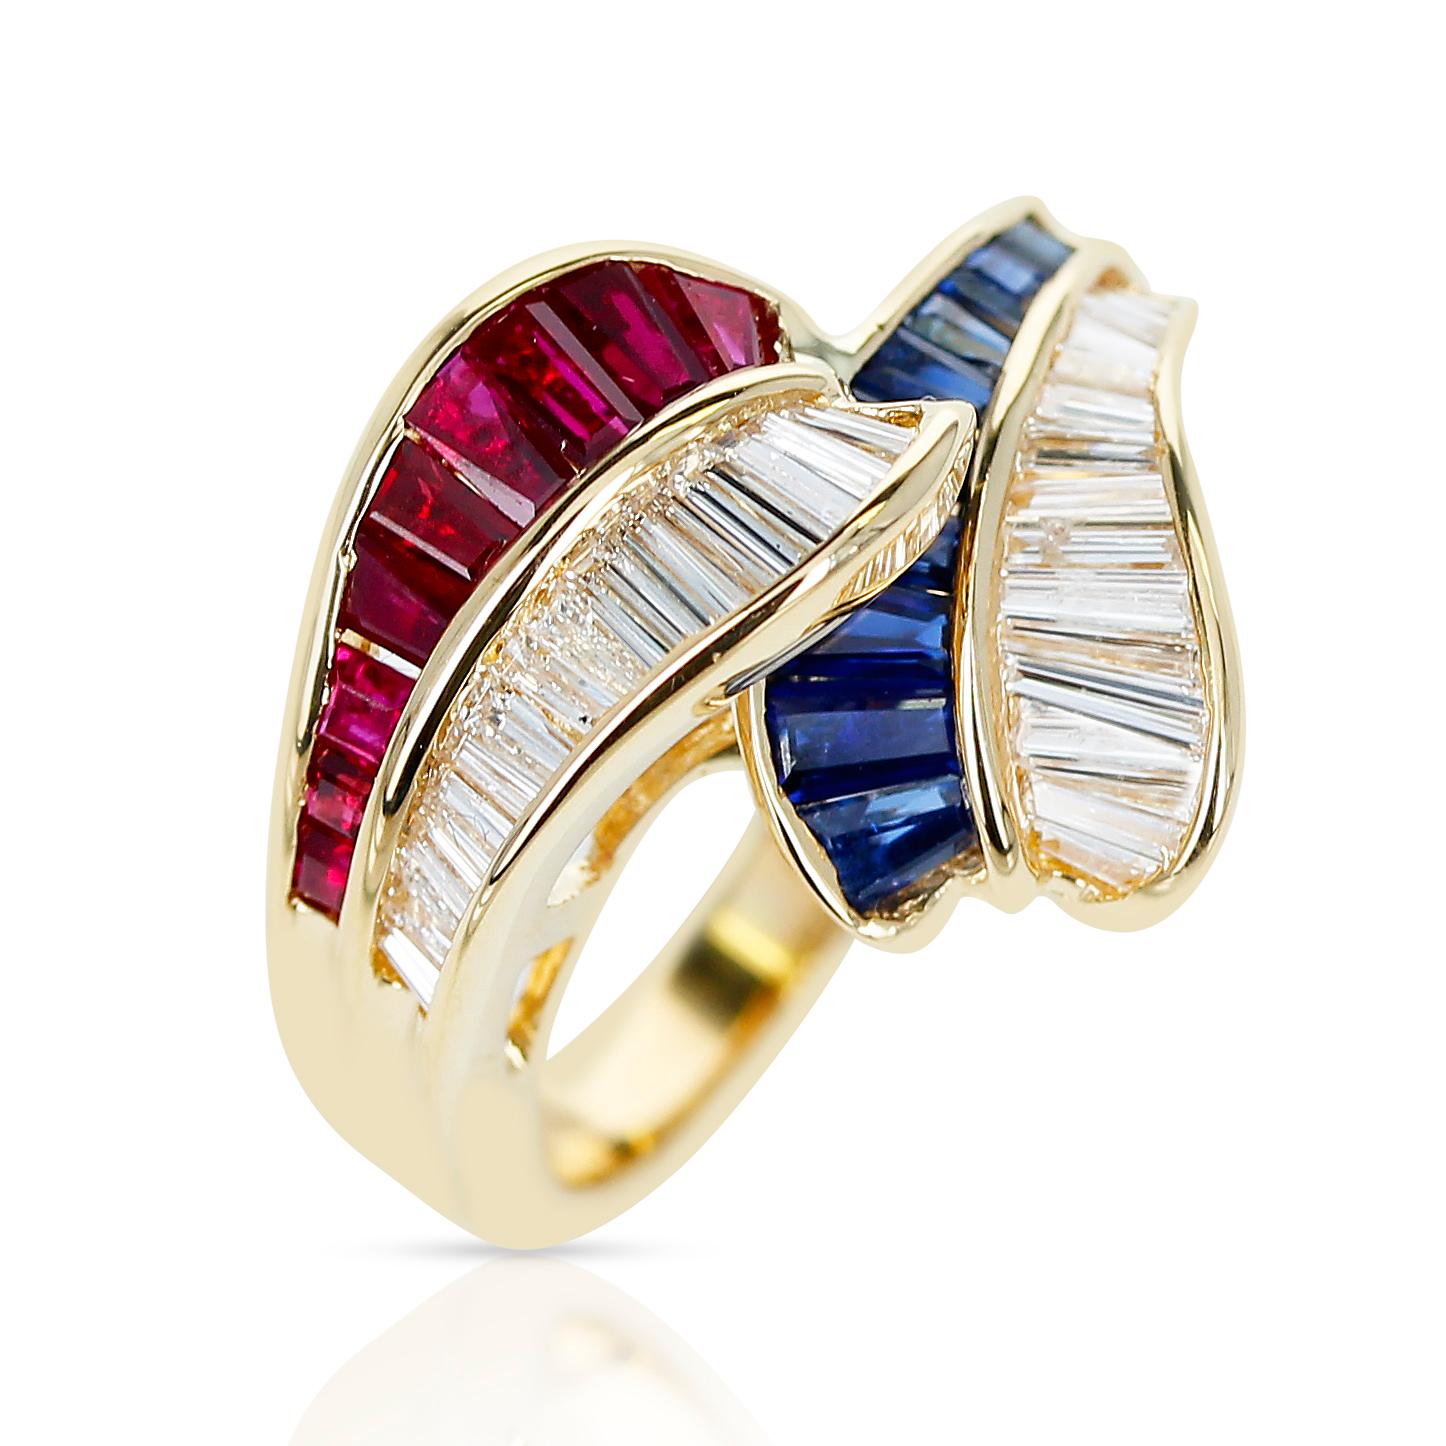 An overlapping ring with 0.85 ct. Ruby, 0.85 ct. Sapphires and 0.84 ct. Diamonds made in 18 Karat Yellow Gold. The total weight of the ring is 6.69 grams. Ring Size US 6.25.